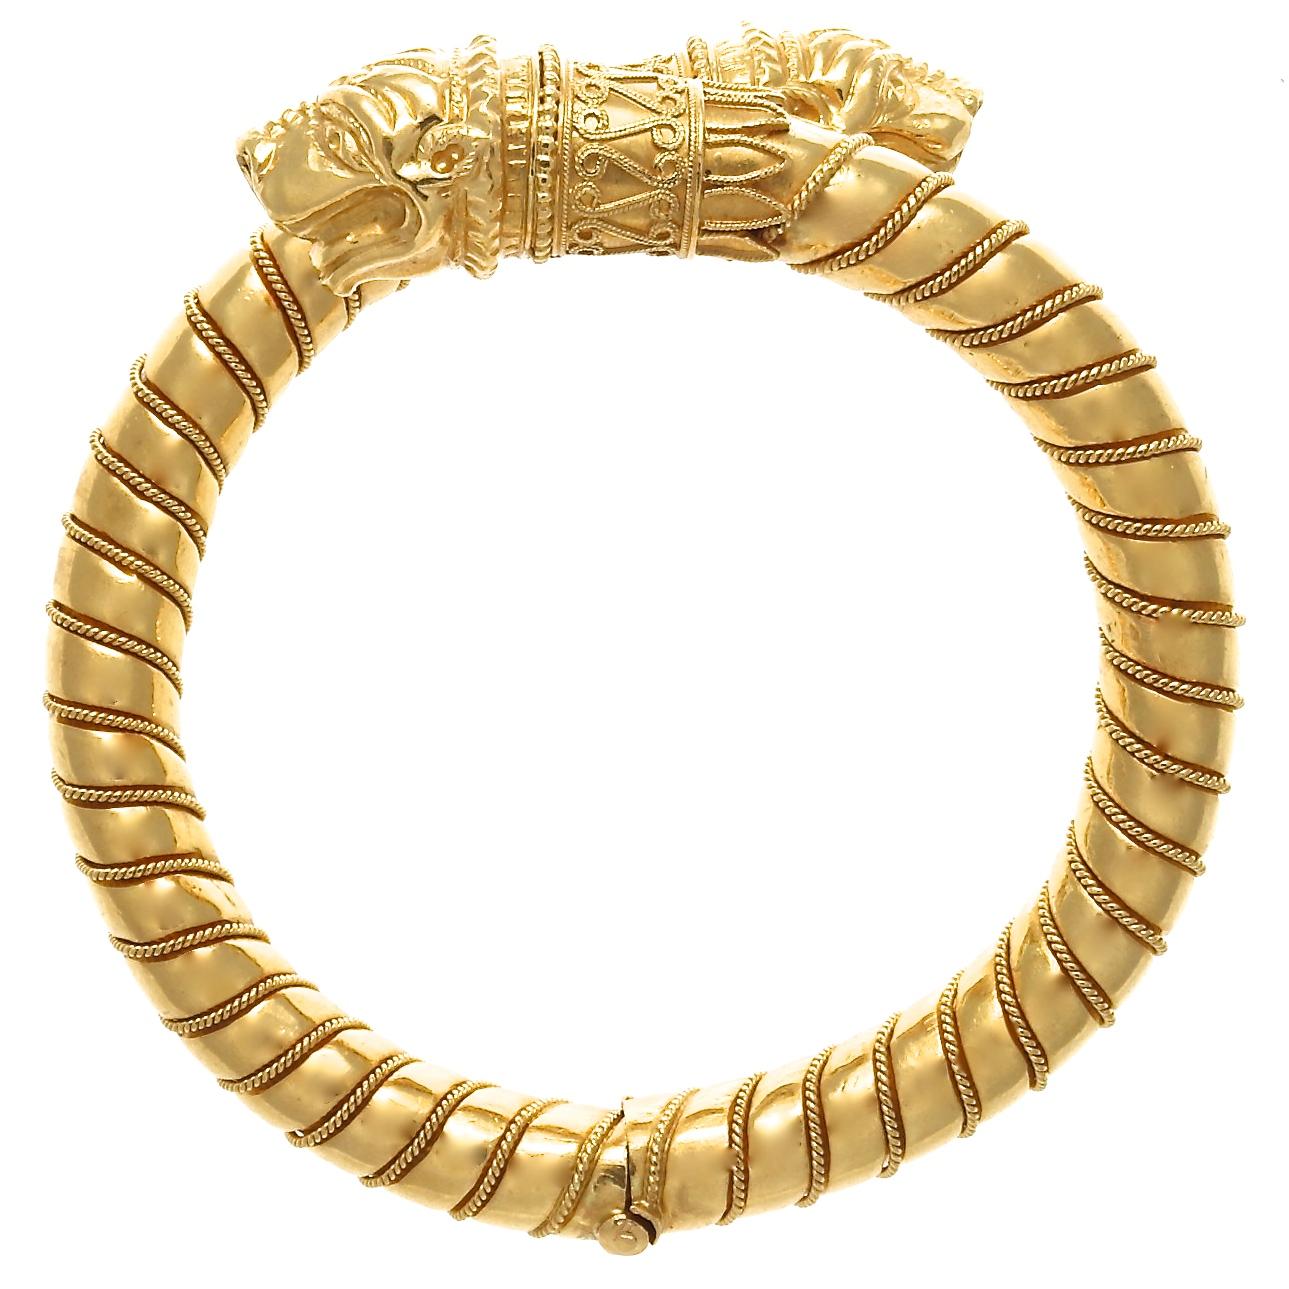 A luxurious 18k gold bangle with ornamental dog head ends that wrap around the wrist. The perfect addition to your wrist stack, adding the opulence of pure gold with a unique design. 48.9 grams. Inside dimensions measure 2-1/8 inches x 2 inches. 